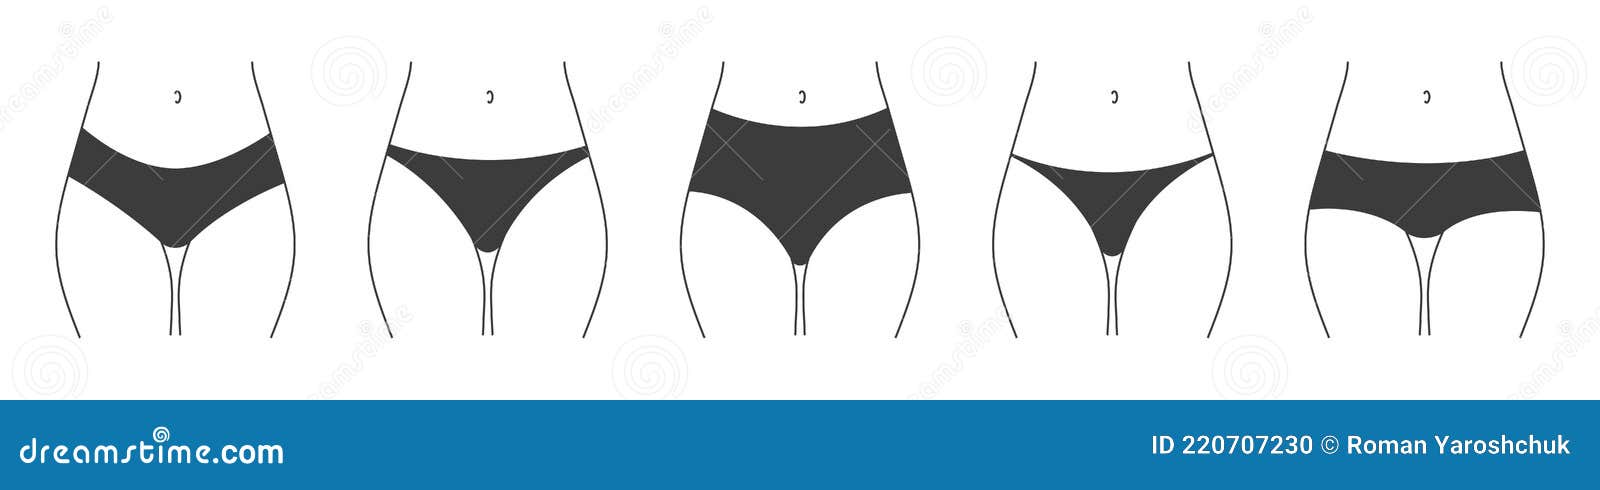 Different Types of Panties. Collection of Lingerie Back View Stock Vector -  Illustration of curve, panties: 220707231